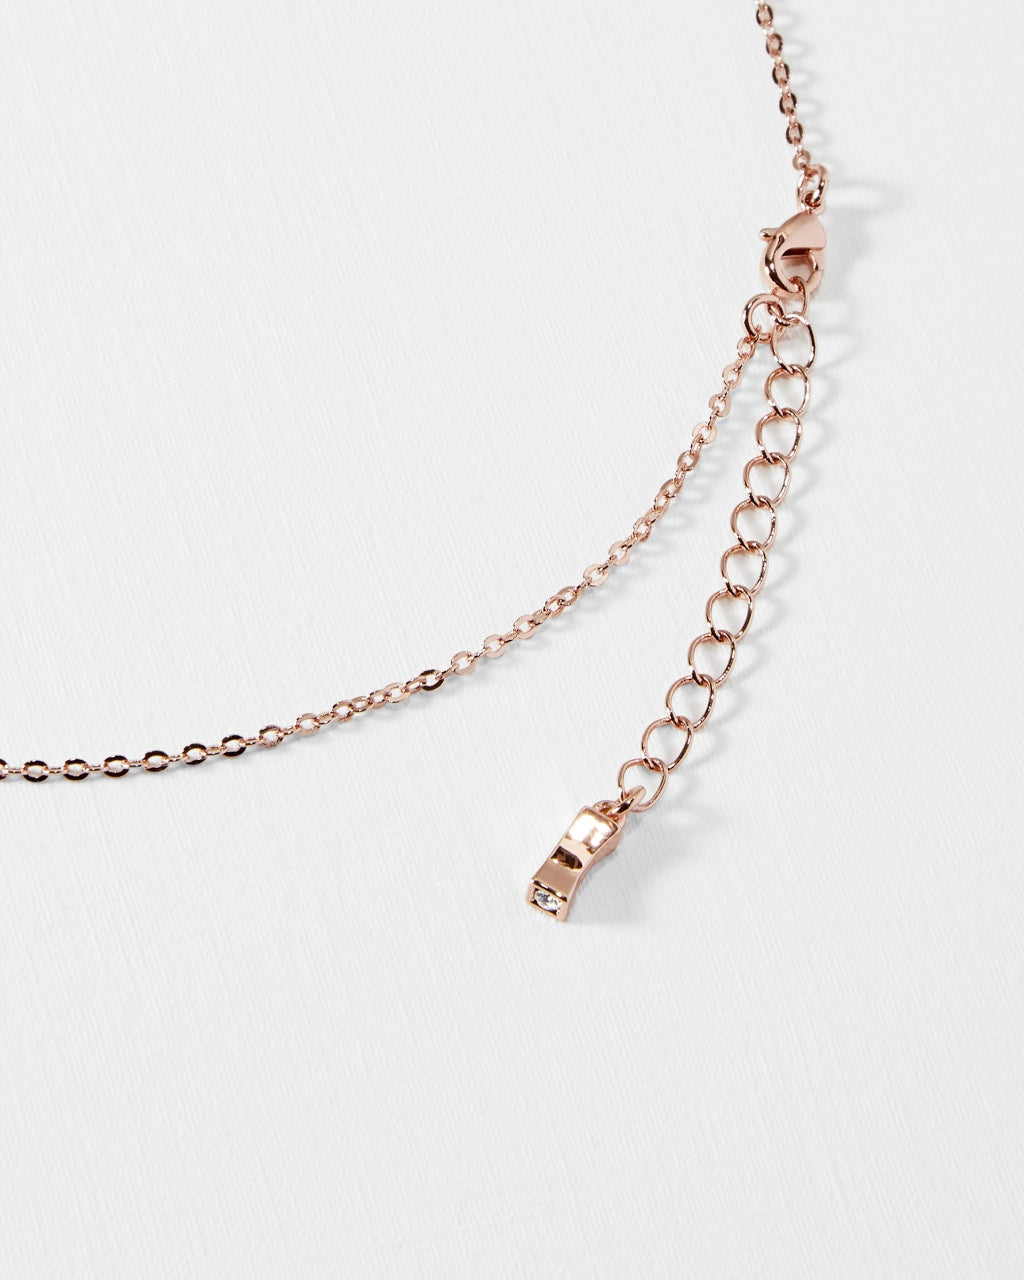 Hannela Crystal Heart Pendant in Rose Gold | eightywingold - official partner of Ted Baker